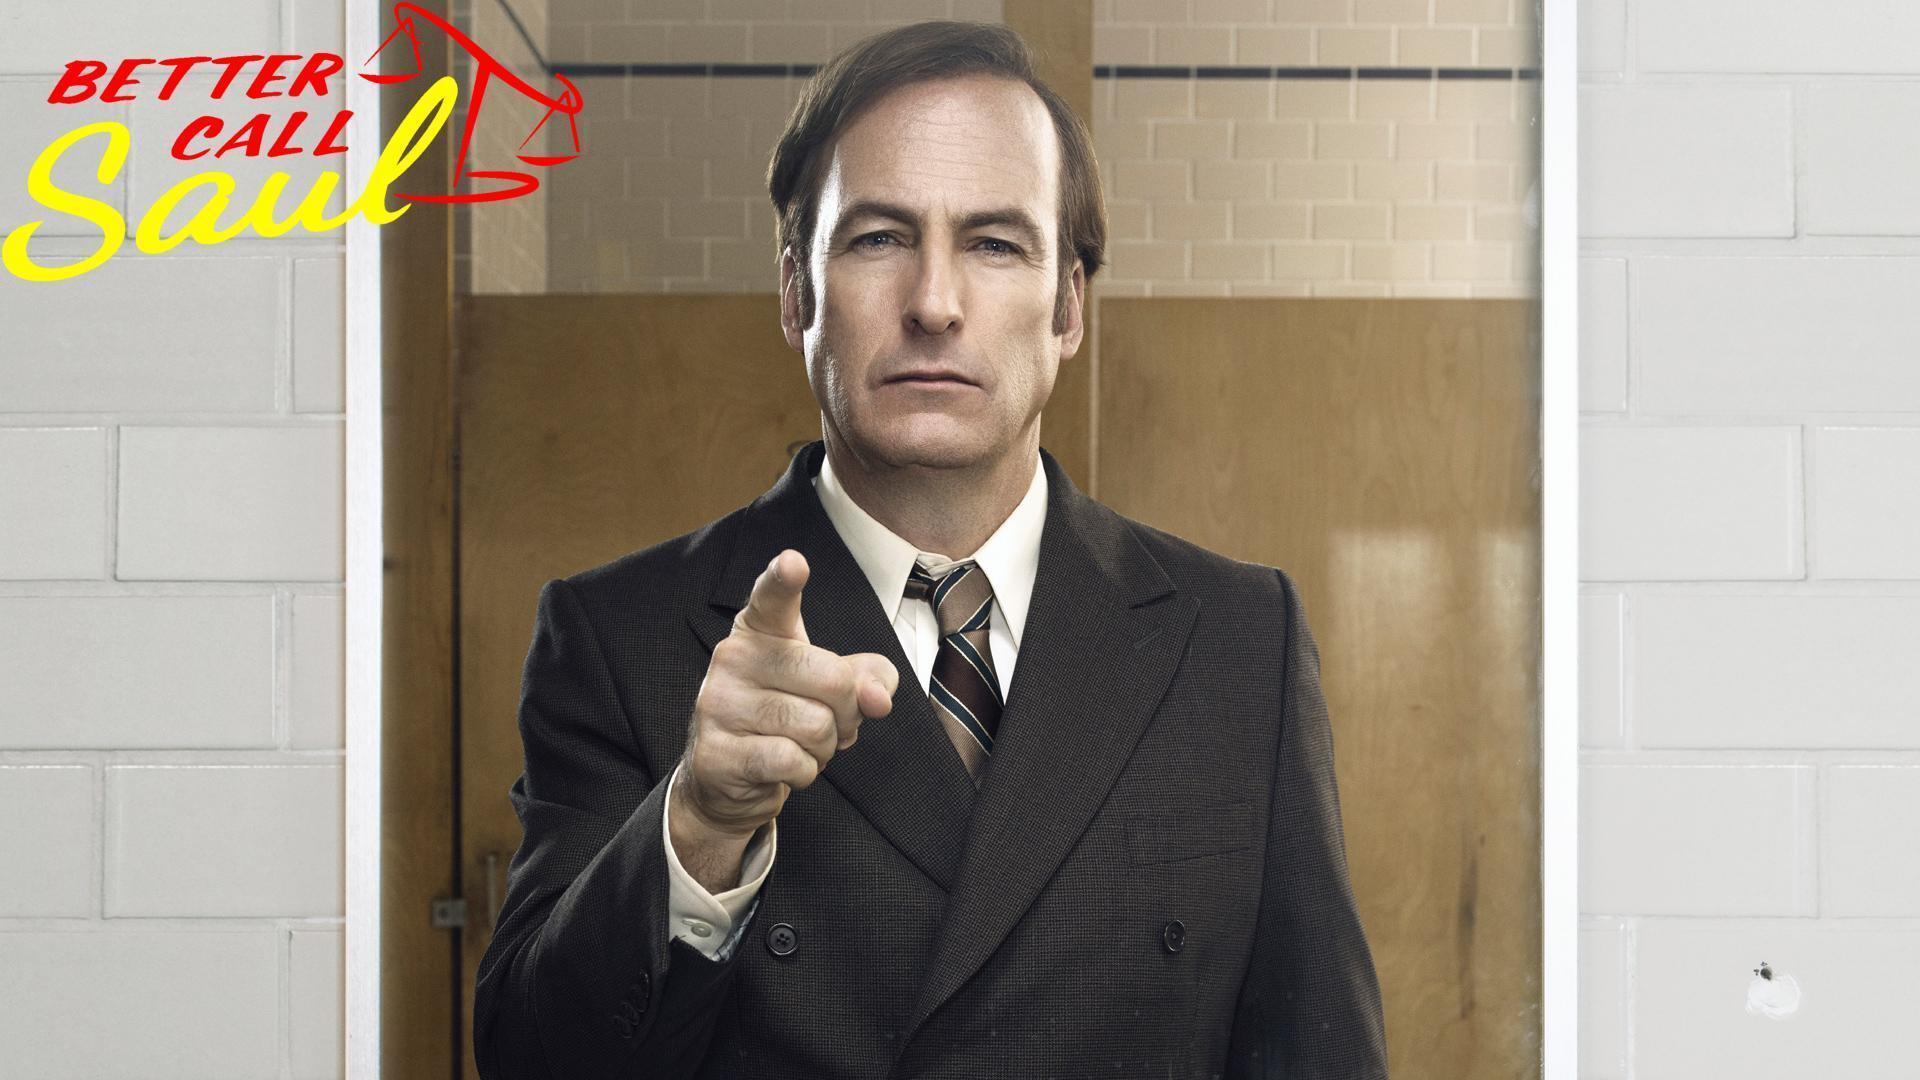 I created some better Call Saul! wallpapers betterCallSaul